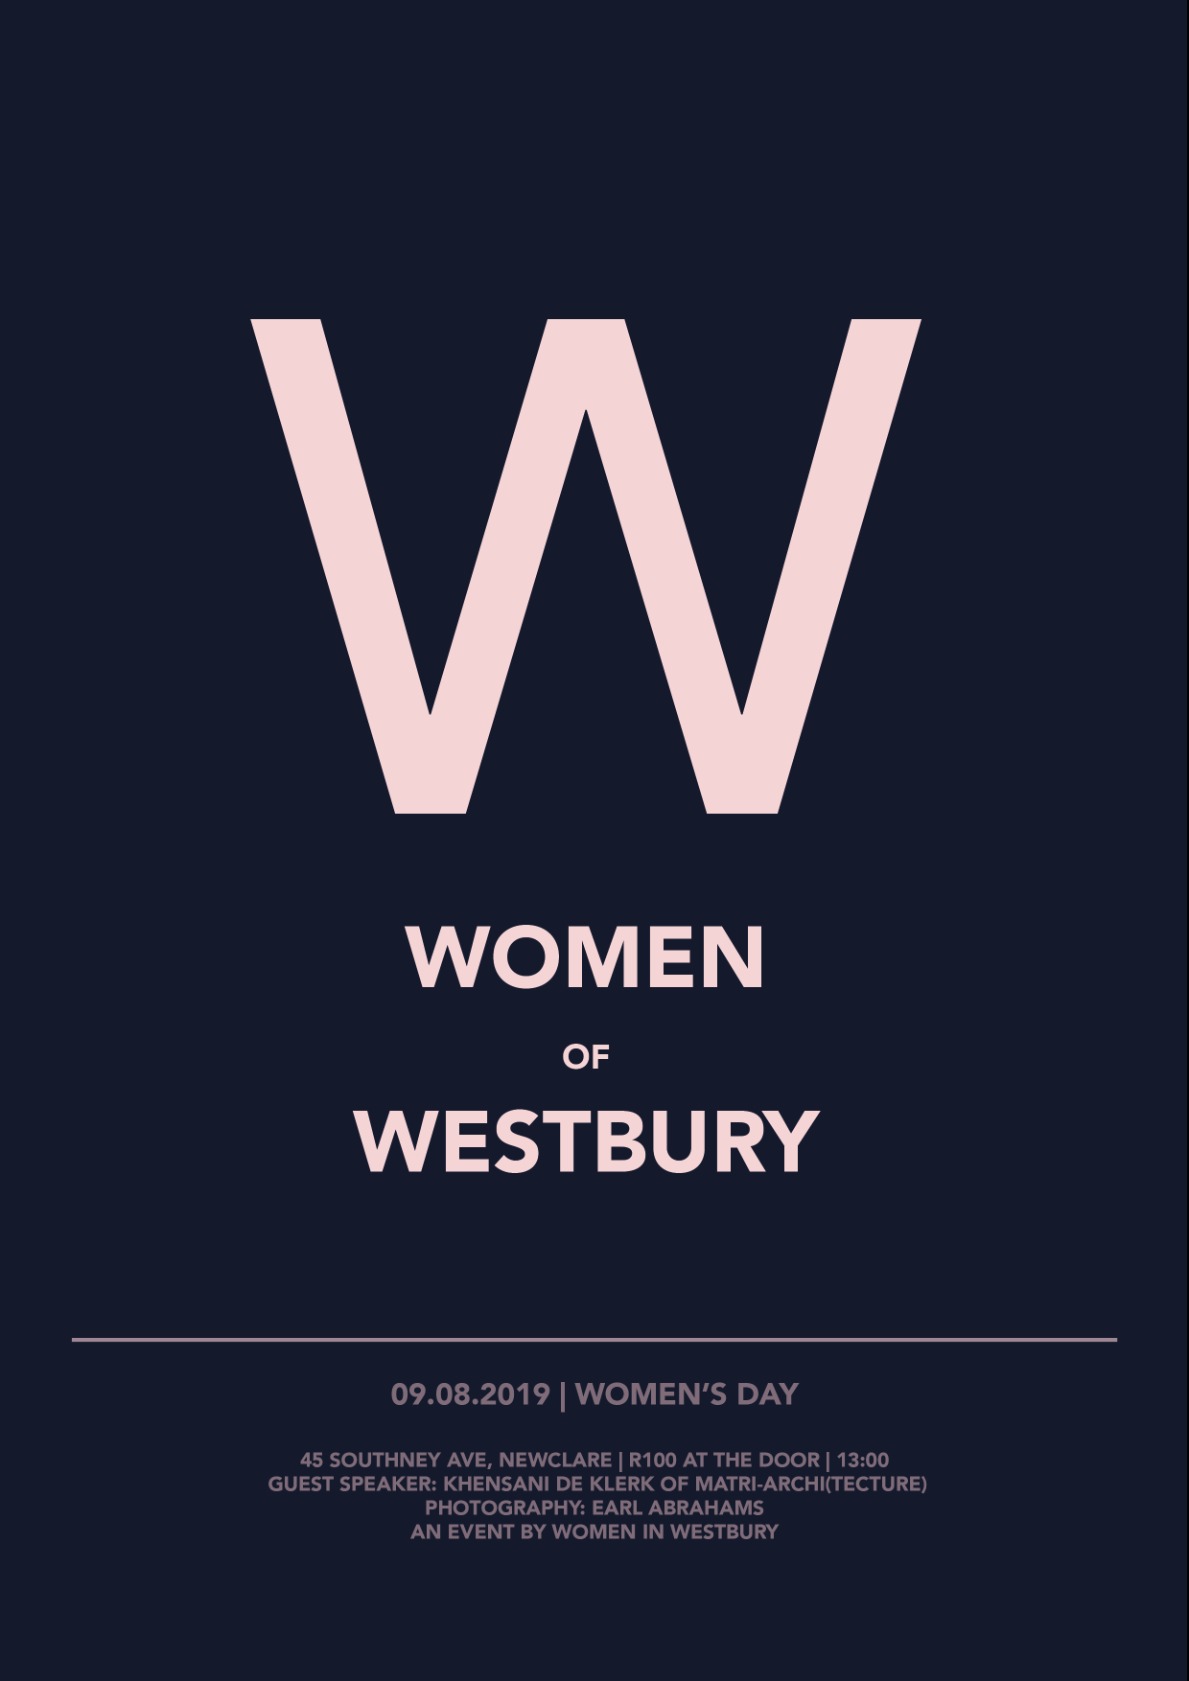 Poster titled 'Women of Westbury' with pink text and blue background